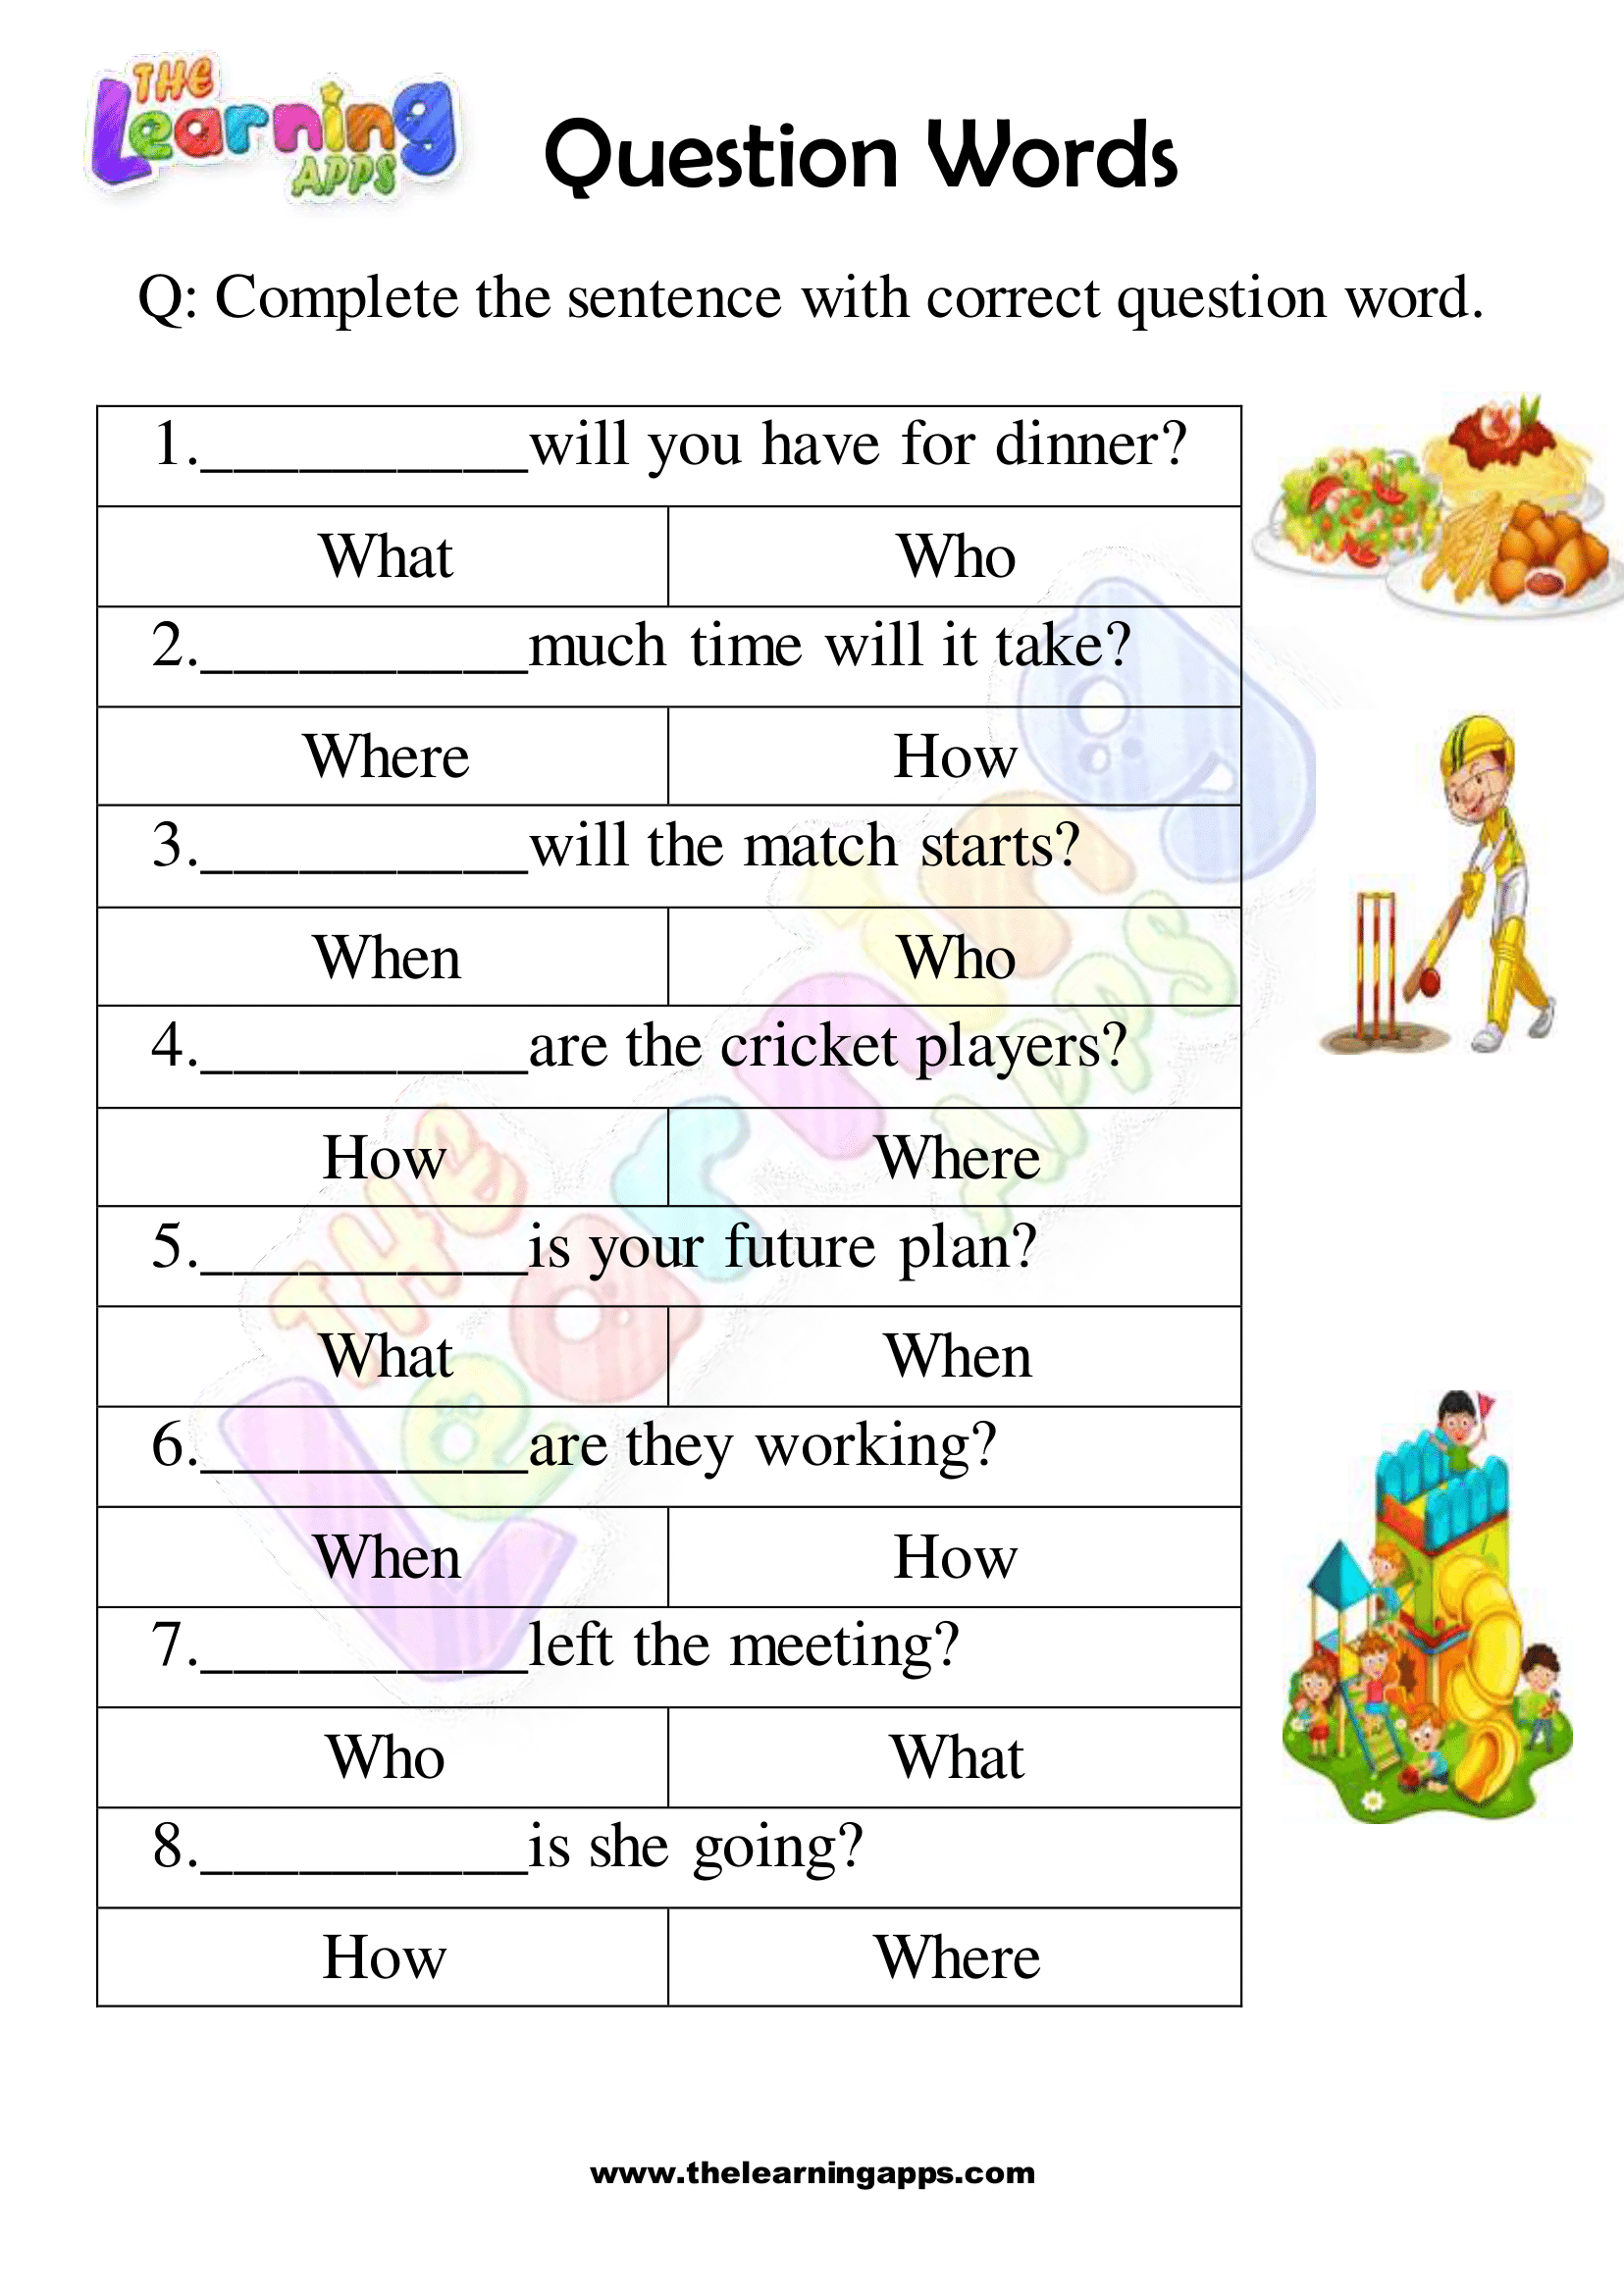 Question-Words-Worksheet-Activity-07